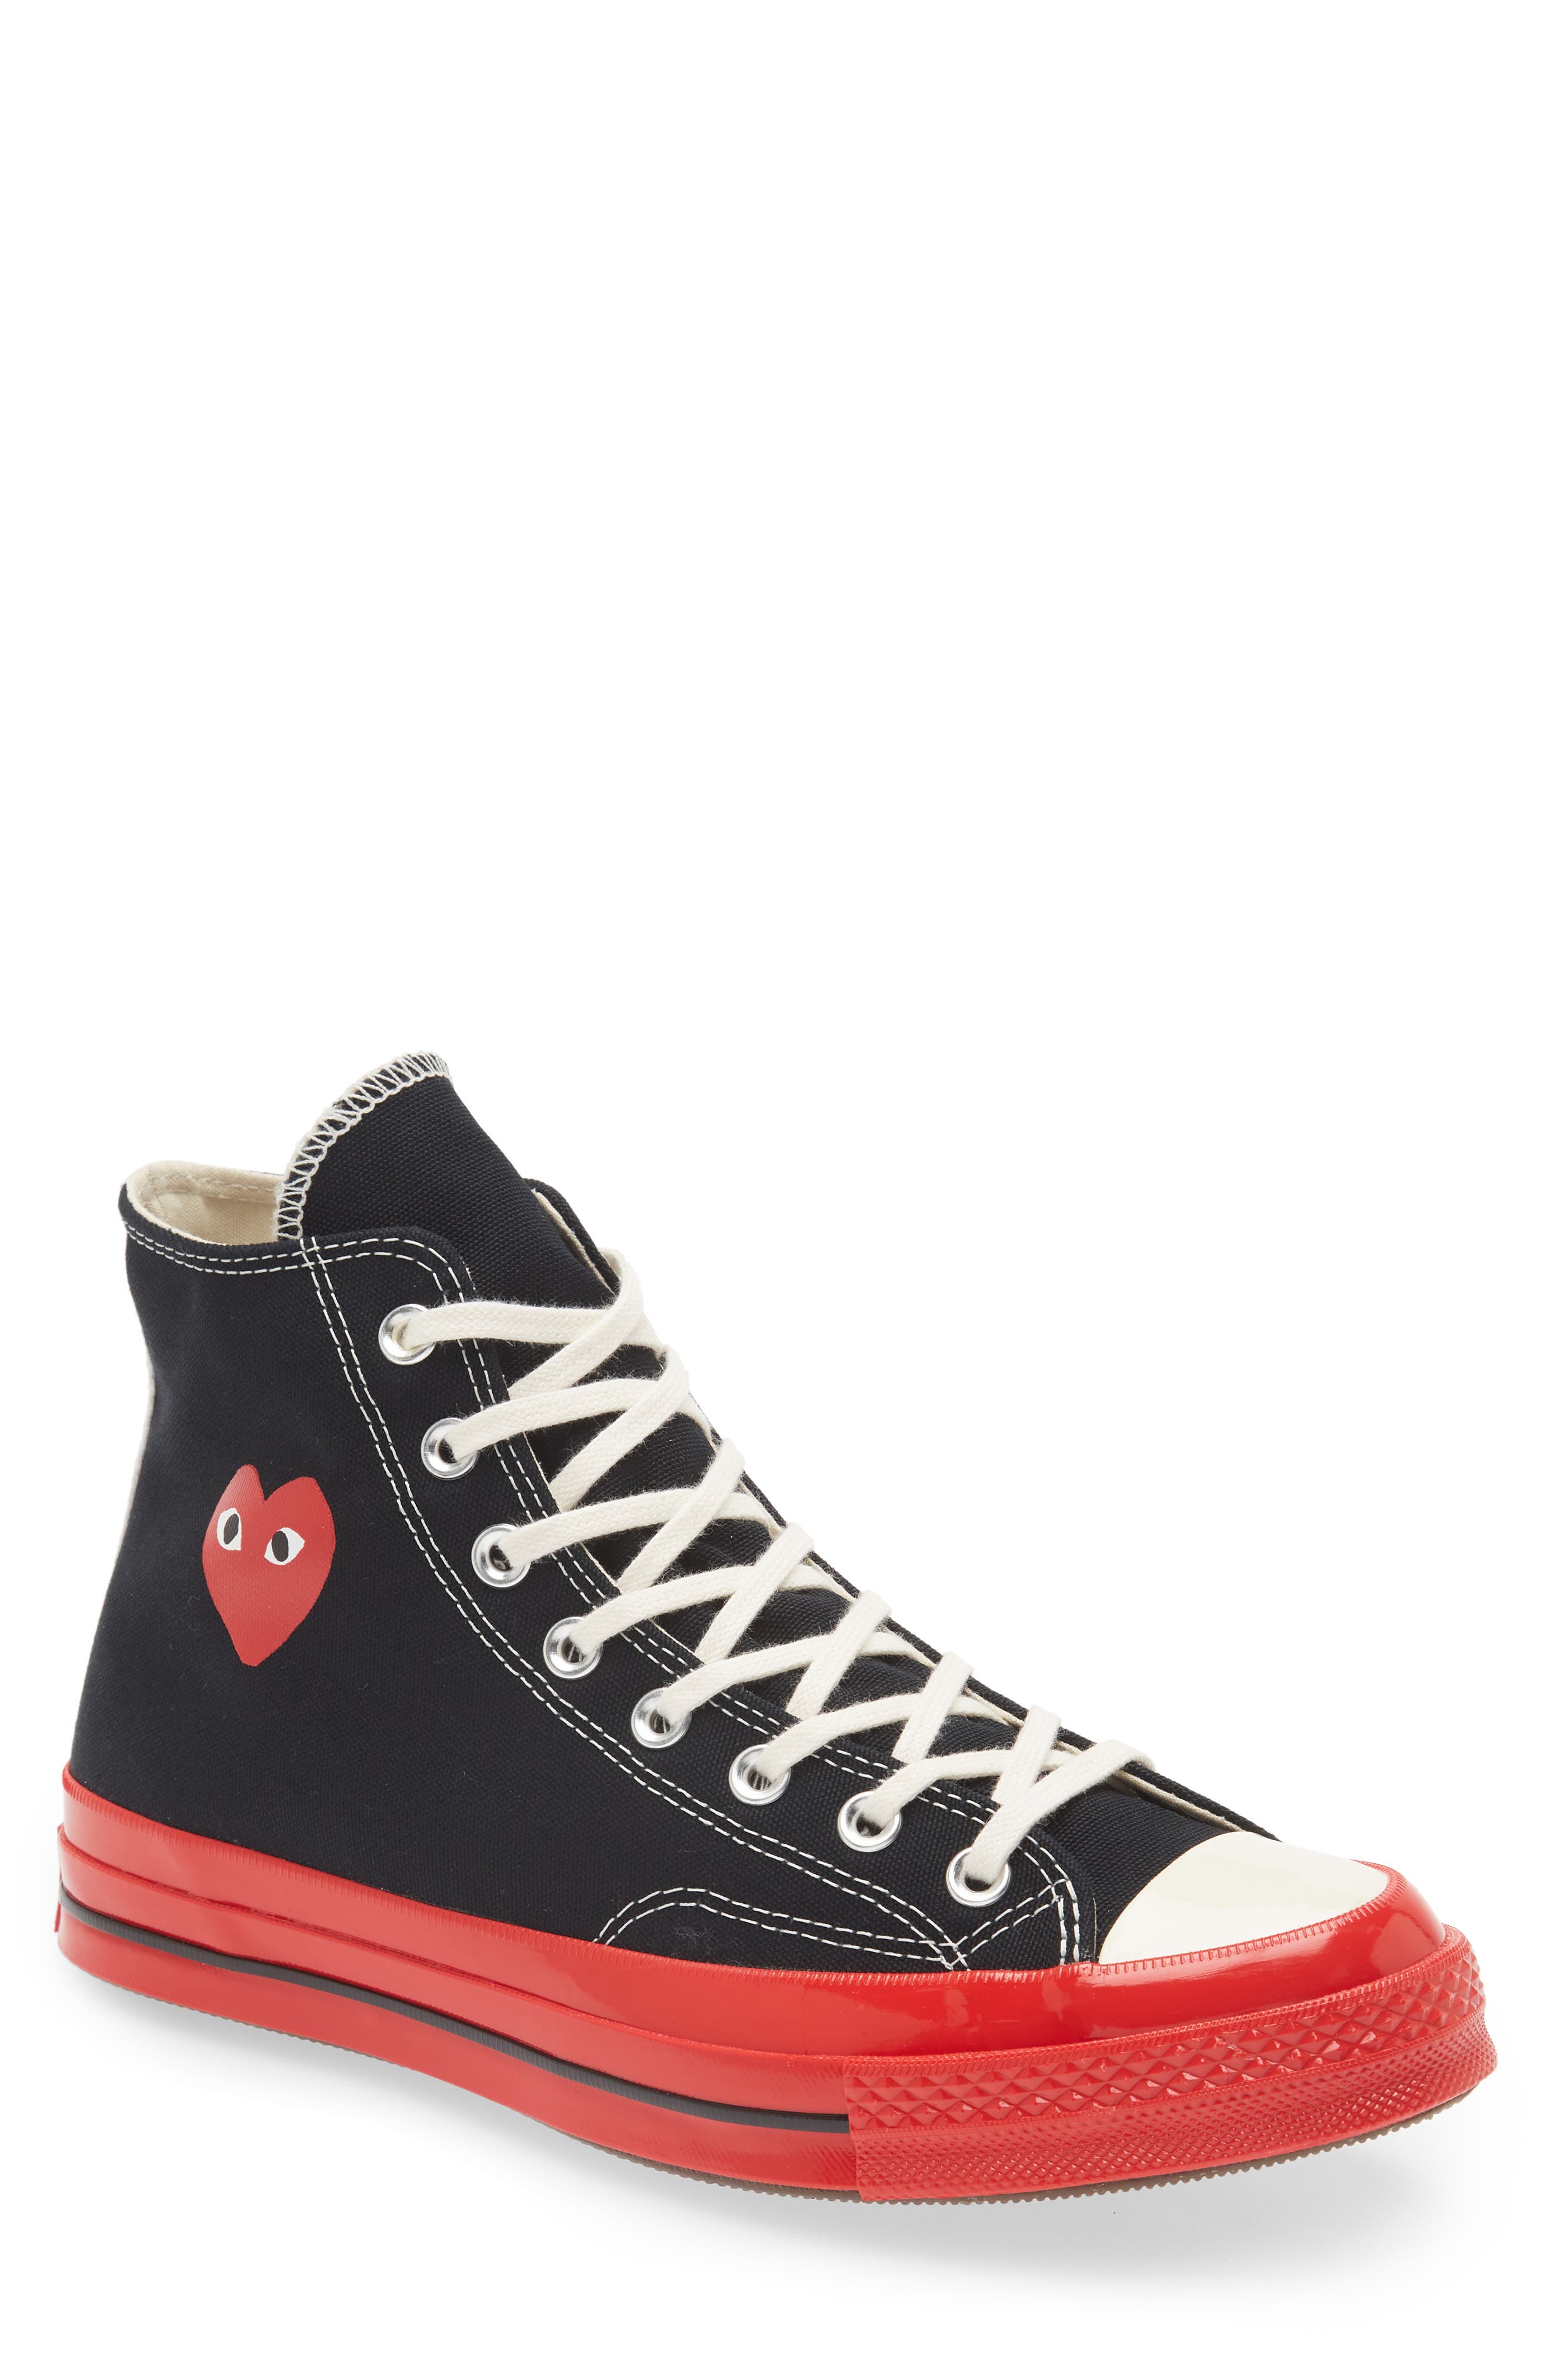 Comme des Garcons PLAY x Converse Chuck Taylor(R) Hidden Heart Red Sole High Top Sneaker in Black